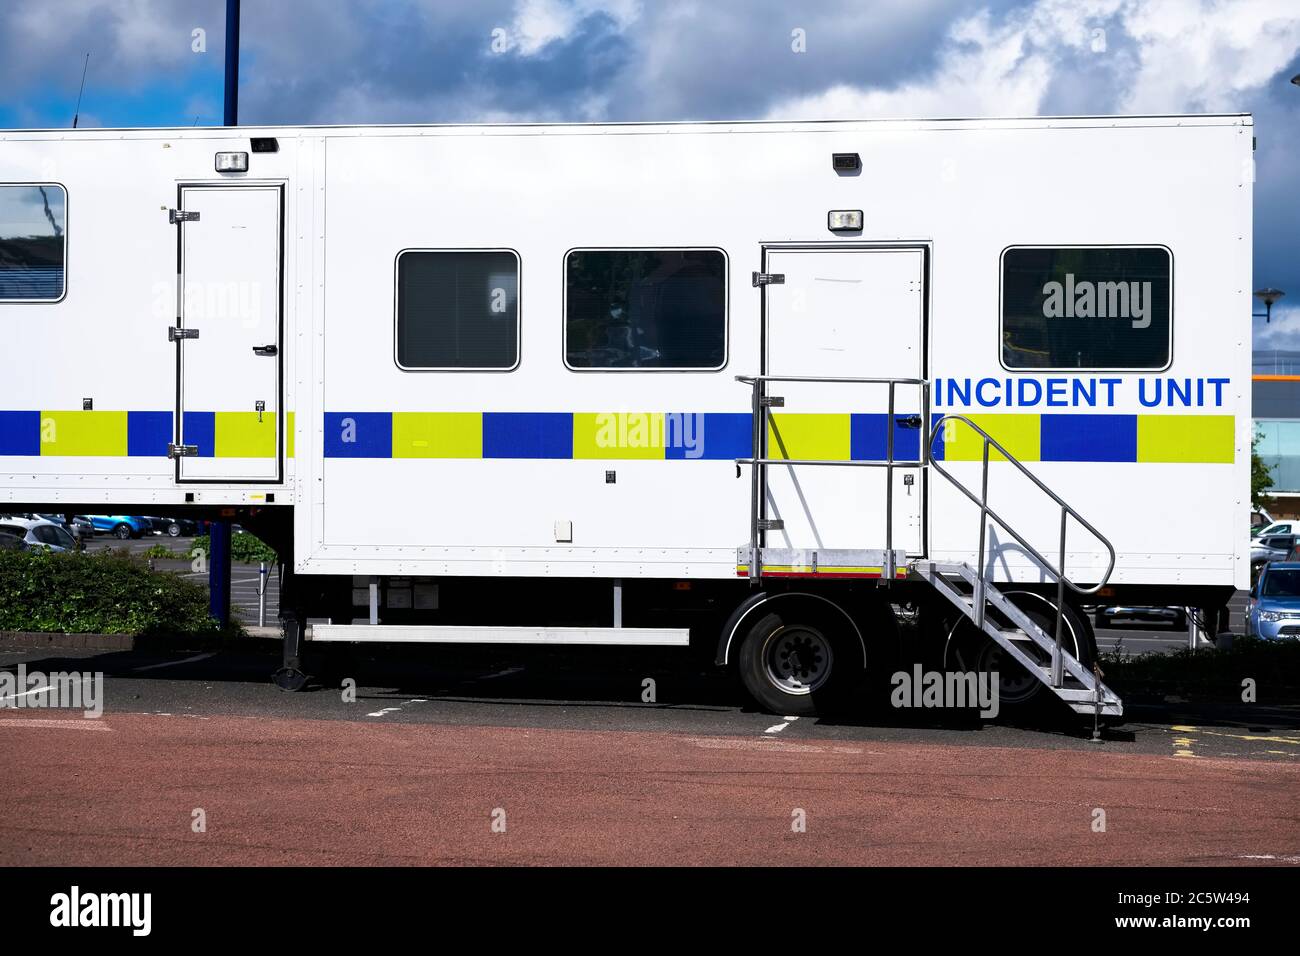 Police incident mobile vehicle for crime investigation Stock Photo